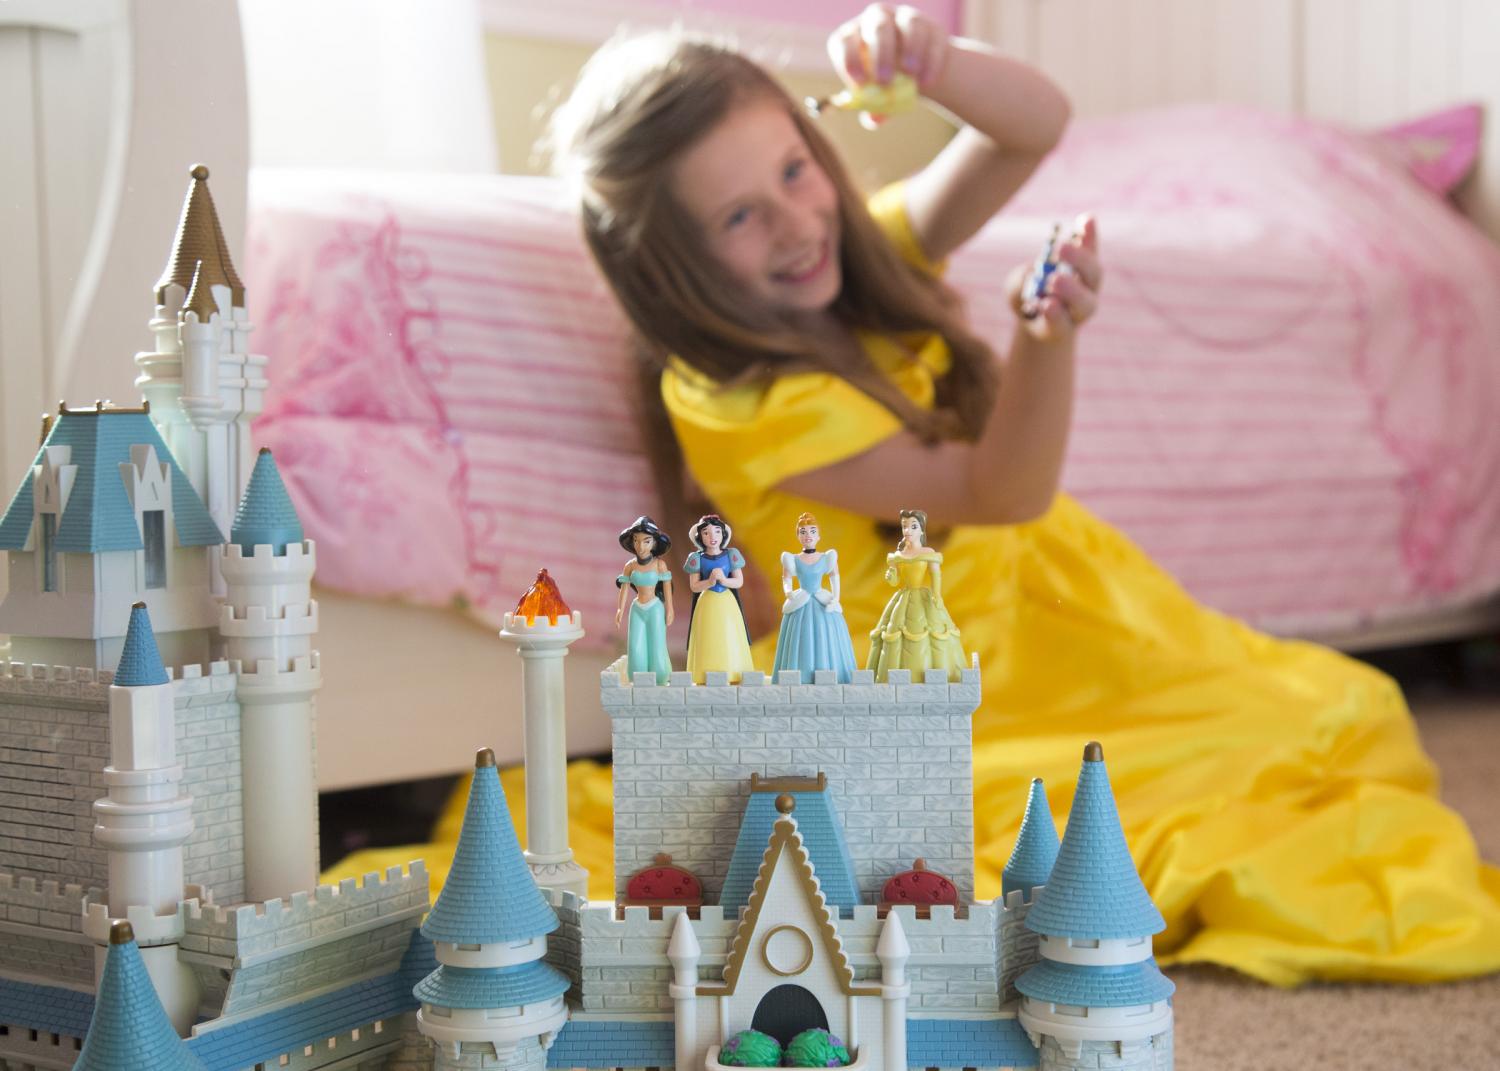 Study finds Disney Princess culture magnifies stereotypes in young girls